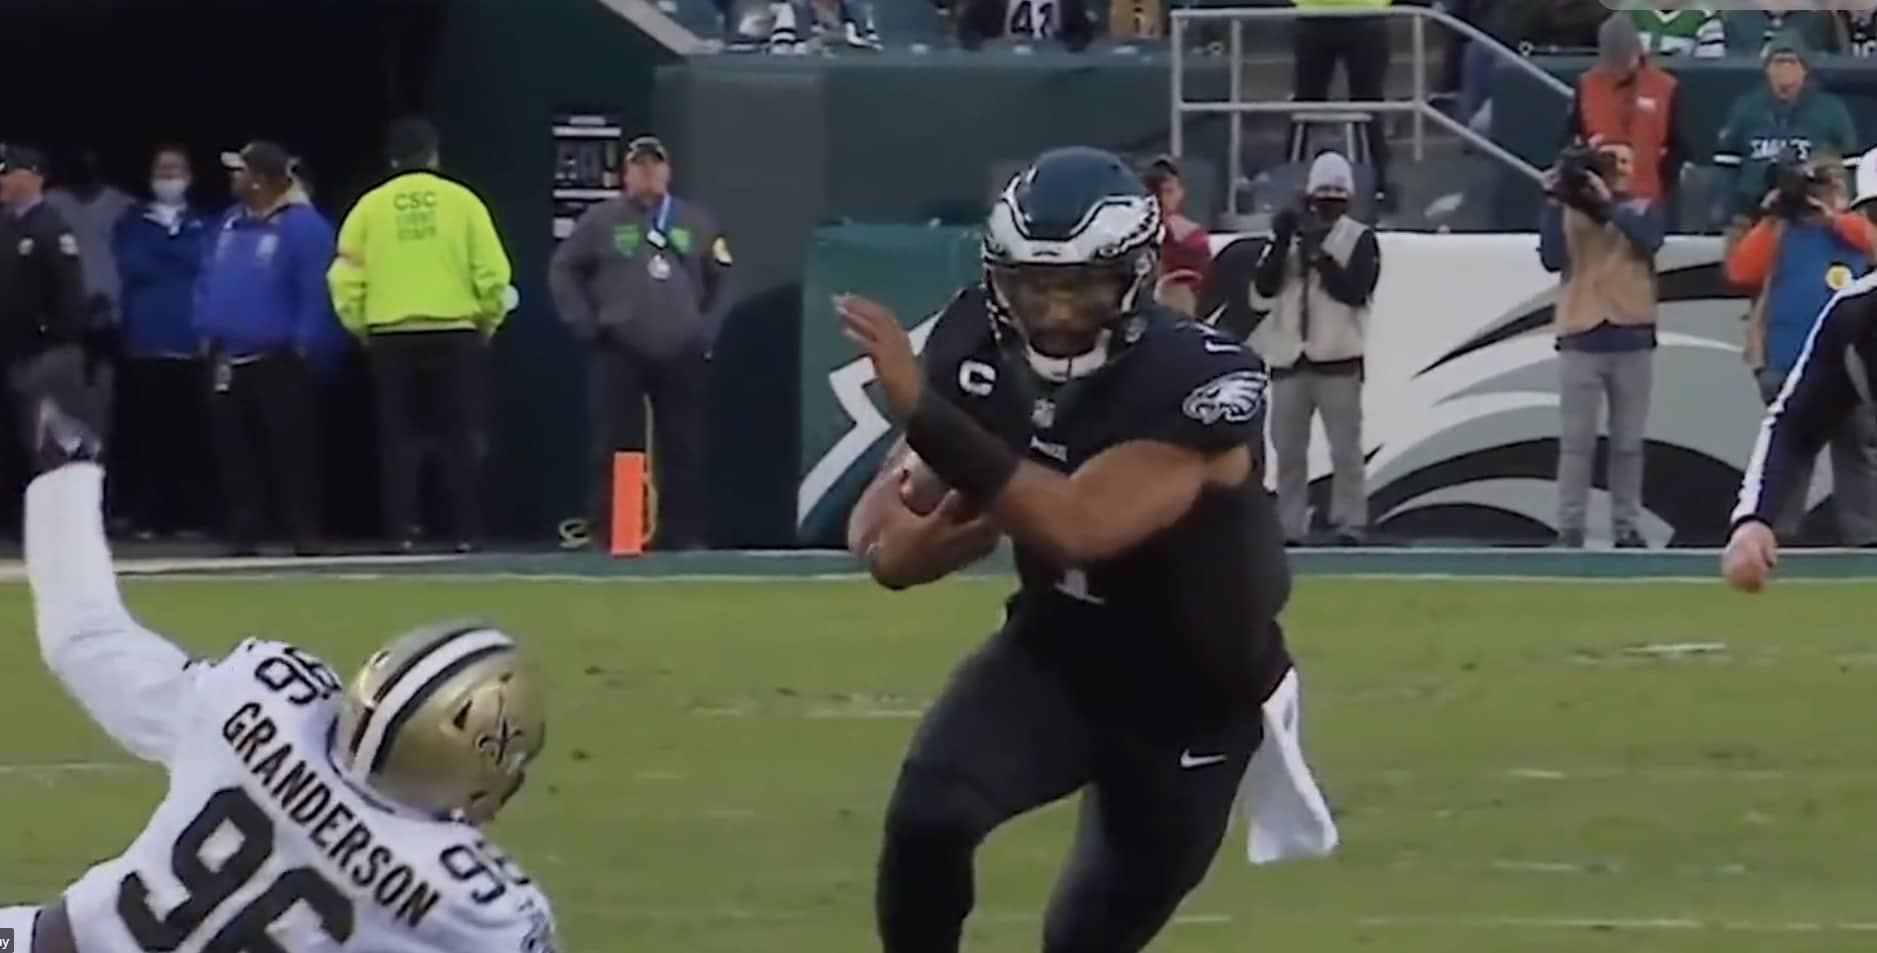 This Eagles Hype Video Will Make You Want to Lay Out a Defenseless Receiver